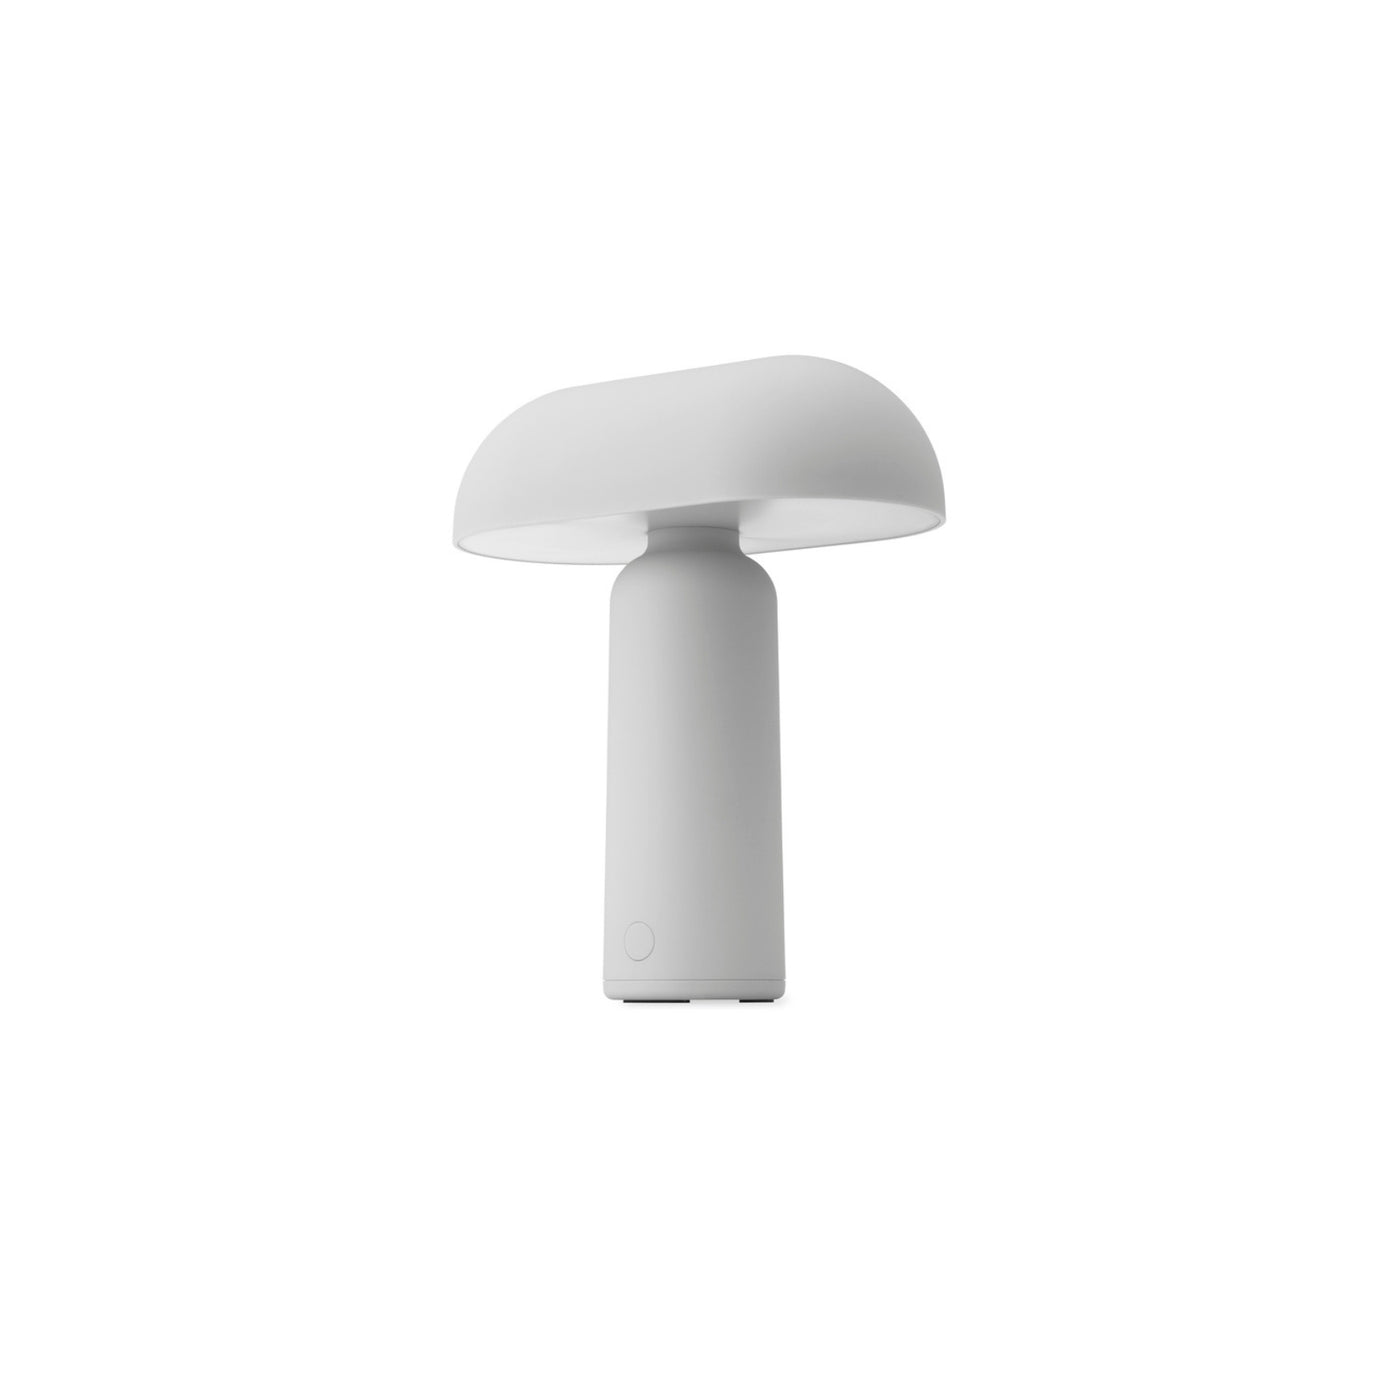 Normann Copenhagen Porta Table Lamp. Free UK delivery from someday designs. #colour_grey